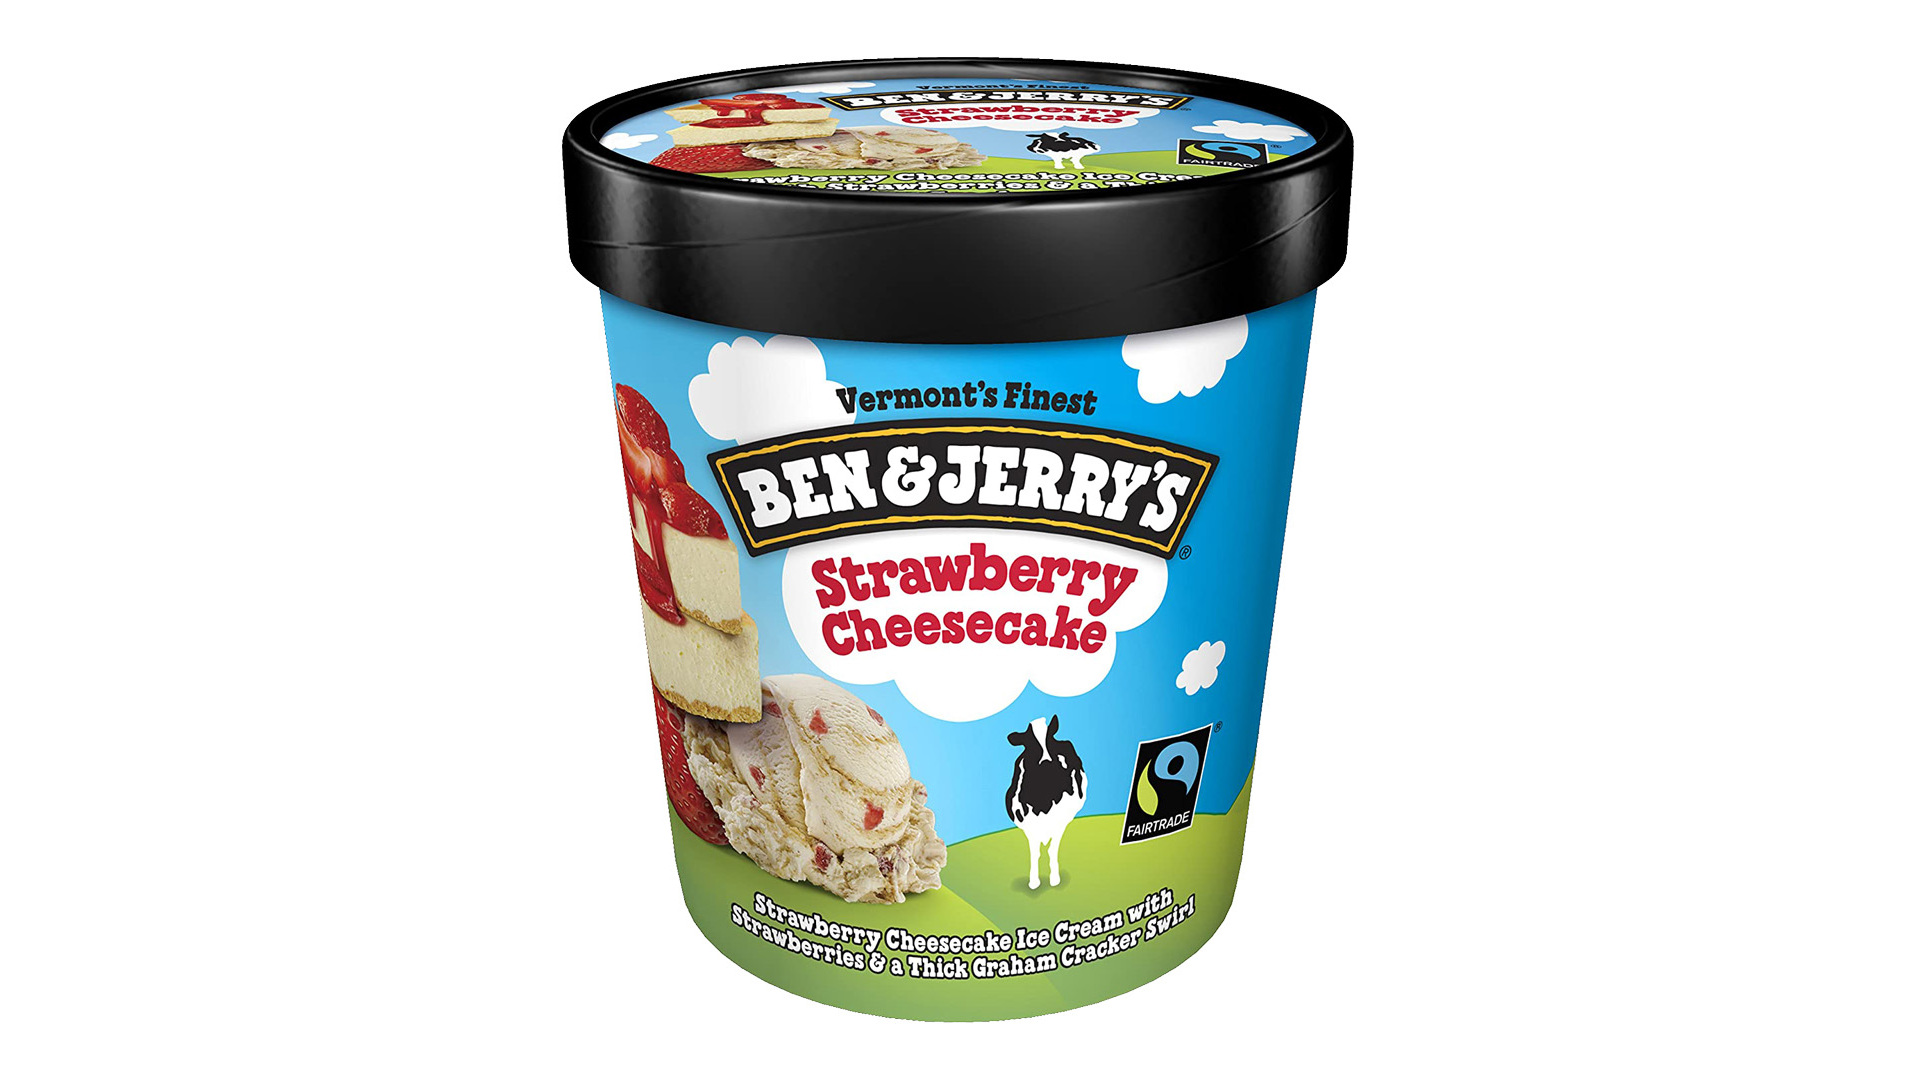 Ben & Jerry's Strawberry Cheesecake 500ml - Pizza Collection in Gants Hill IG2